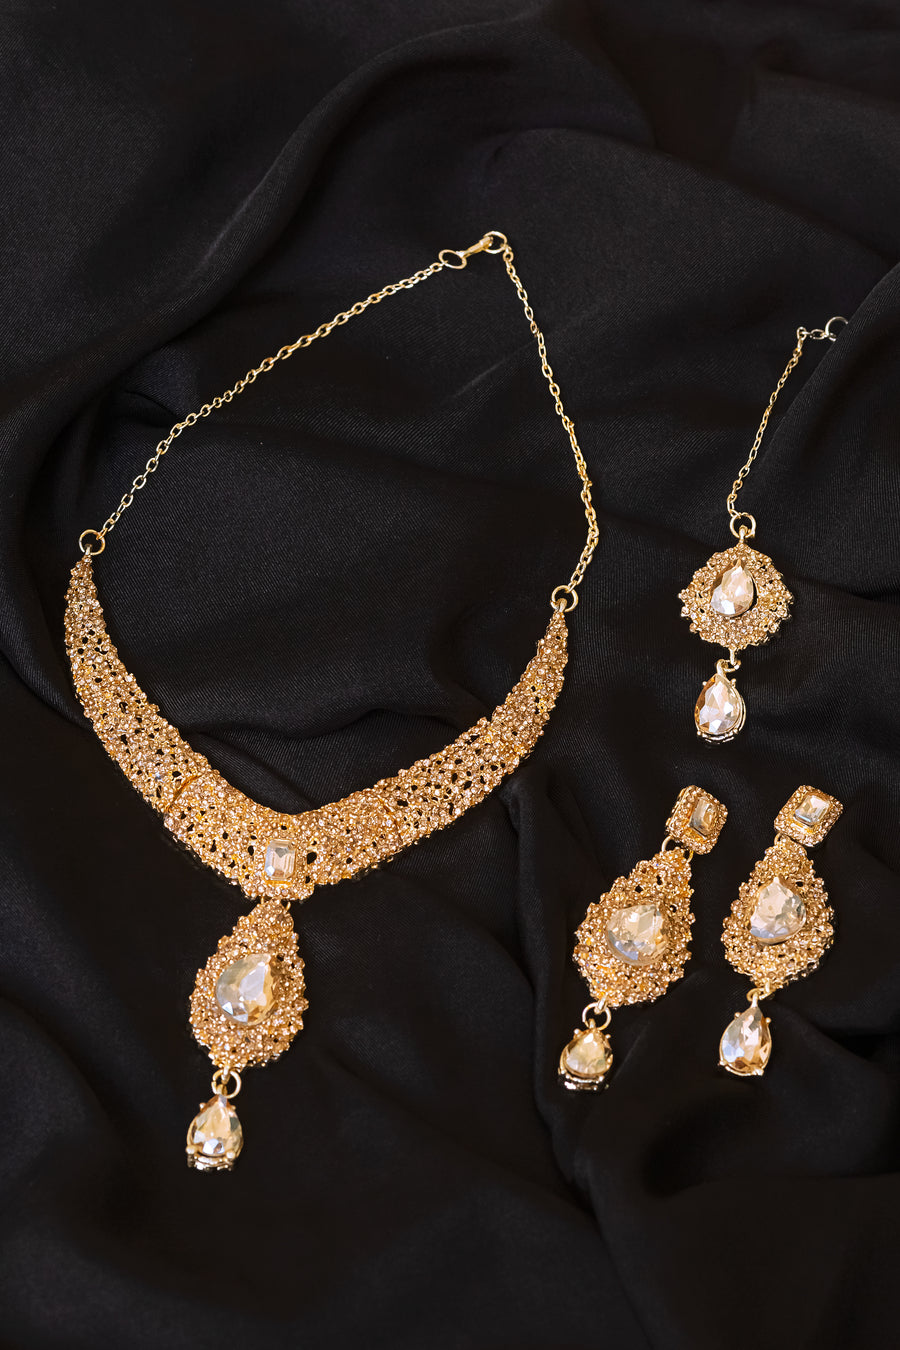 Artificial necklace and earrings Bindi- Areeba's Couture